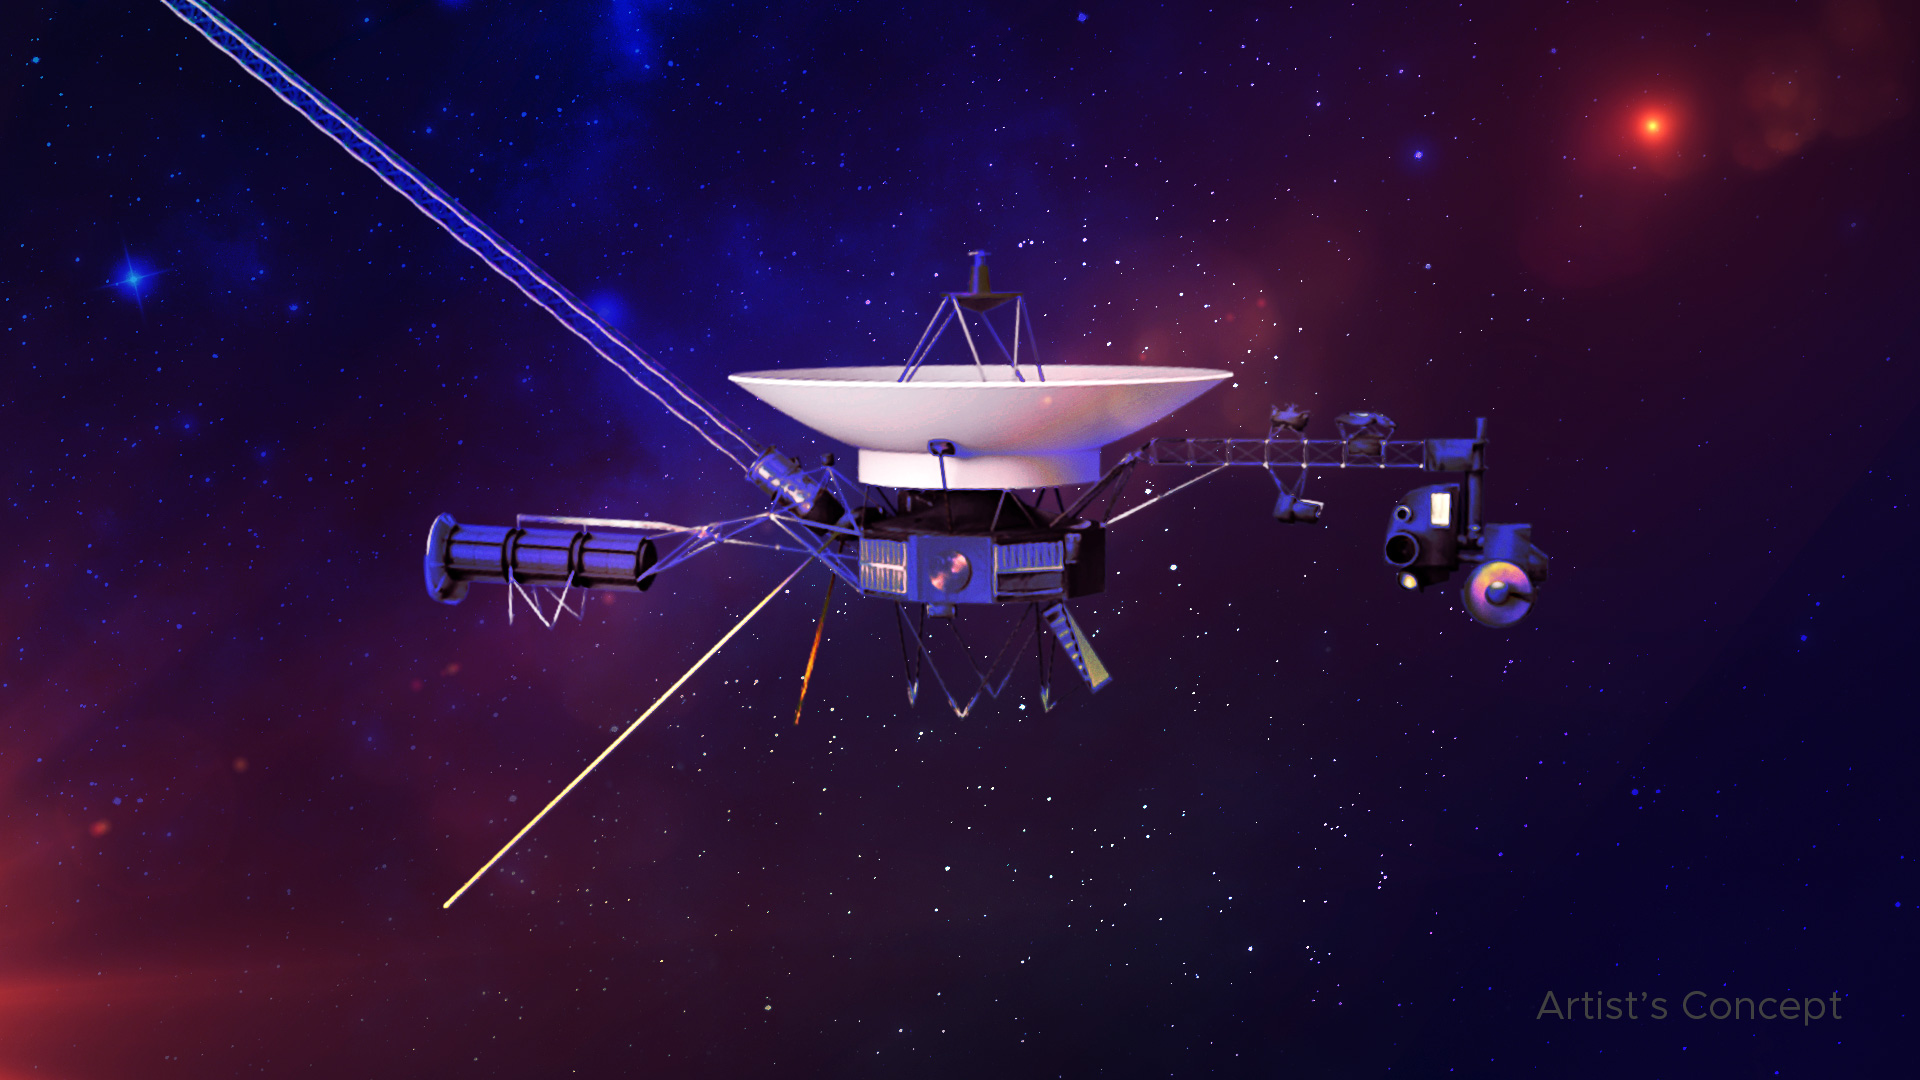 An artist’s concept of the Voyager spacecraft.